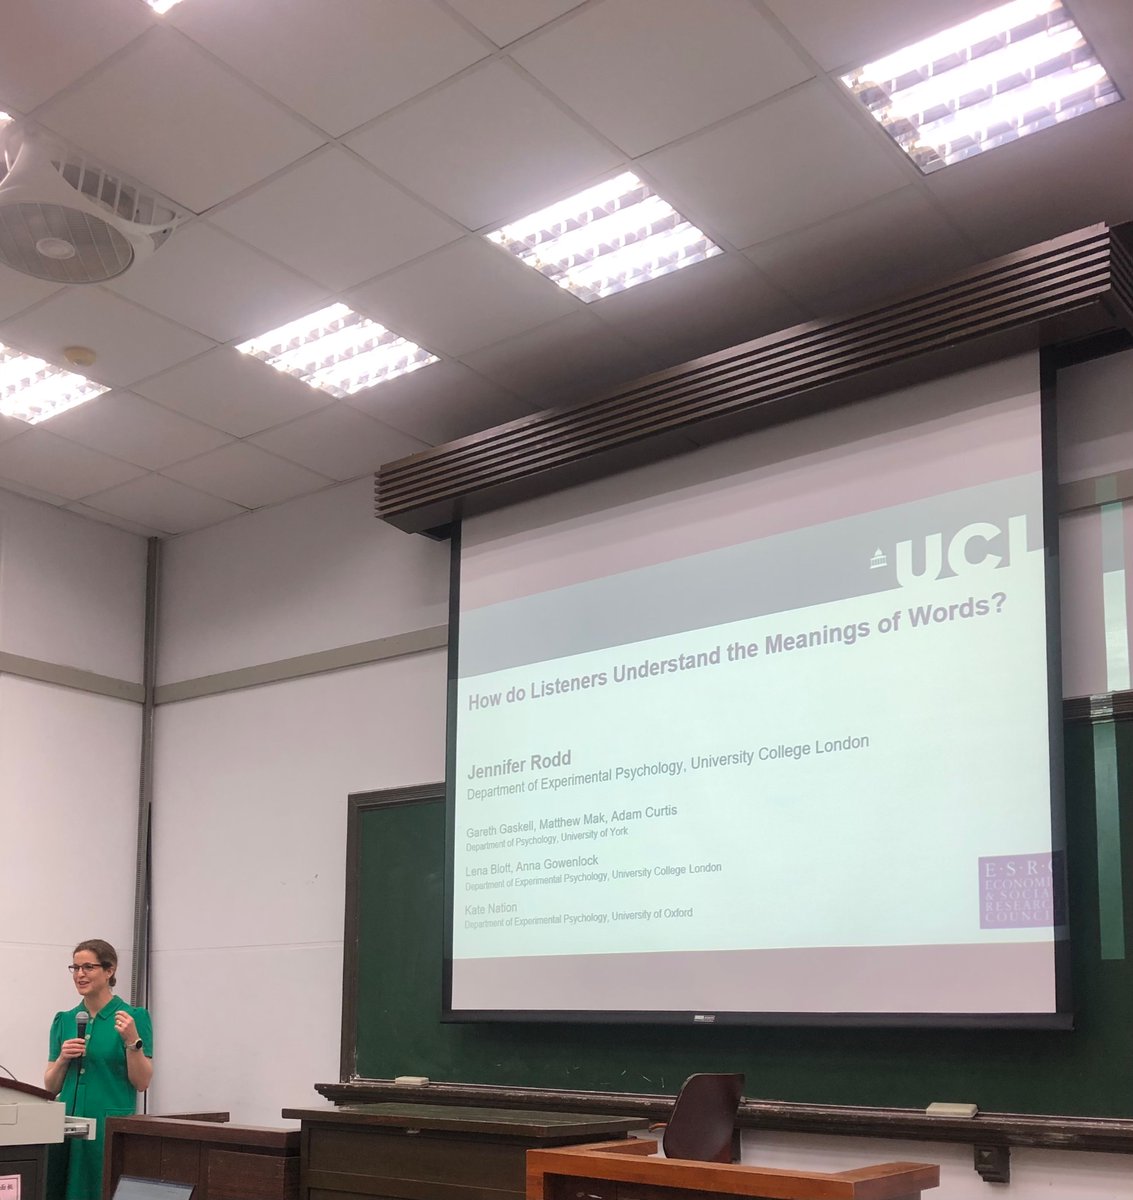 Day 2 of our @UCL_Global visit to see our colleagues @BobbyPoHengChen and @CharleneCLLee at National Taiwan University - @JenniRodd gave a thought-provoking talk on how listeners understand the meanings of words.